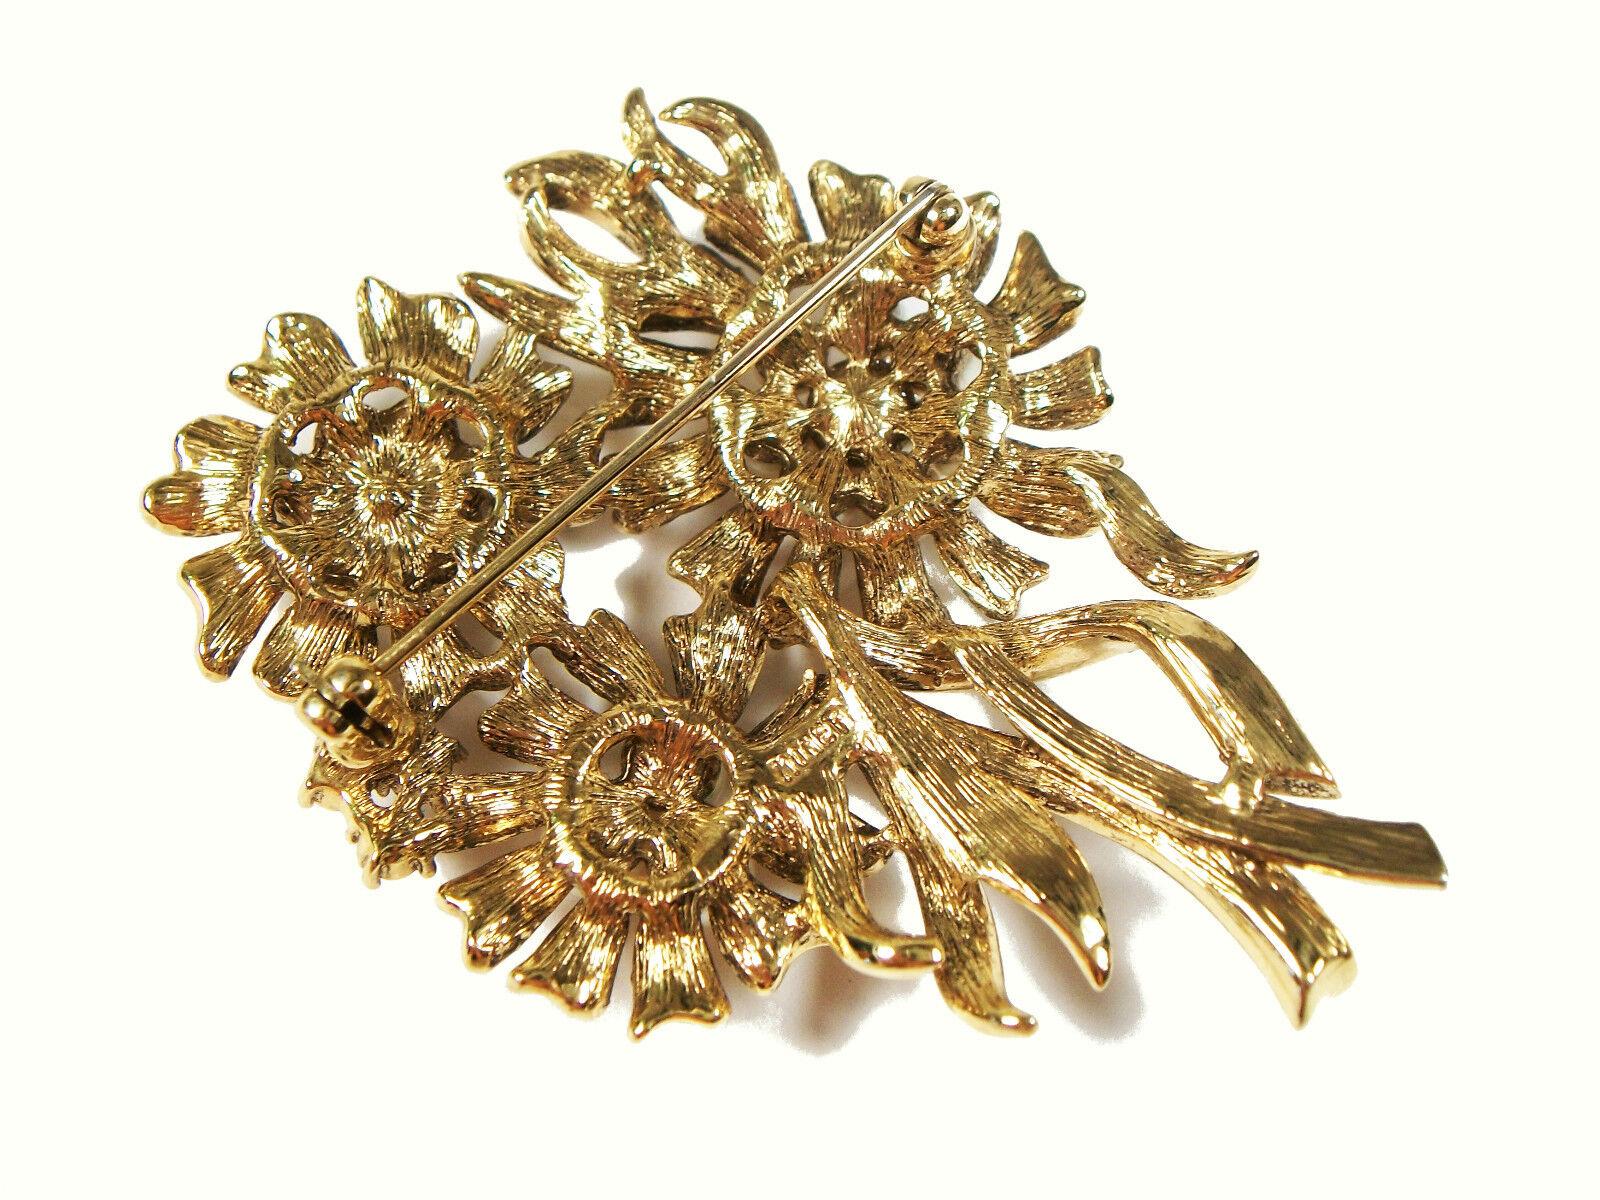 MONET - Vintage Flower Brooch with Pearls & Rhinestones - Signed - Circa 1960's In Good Condition For Sale In Chatham, CA